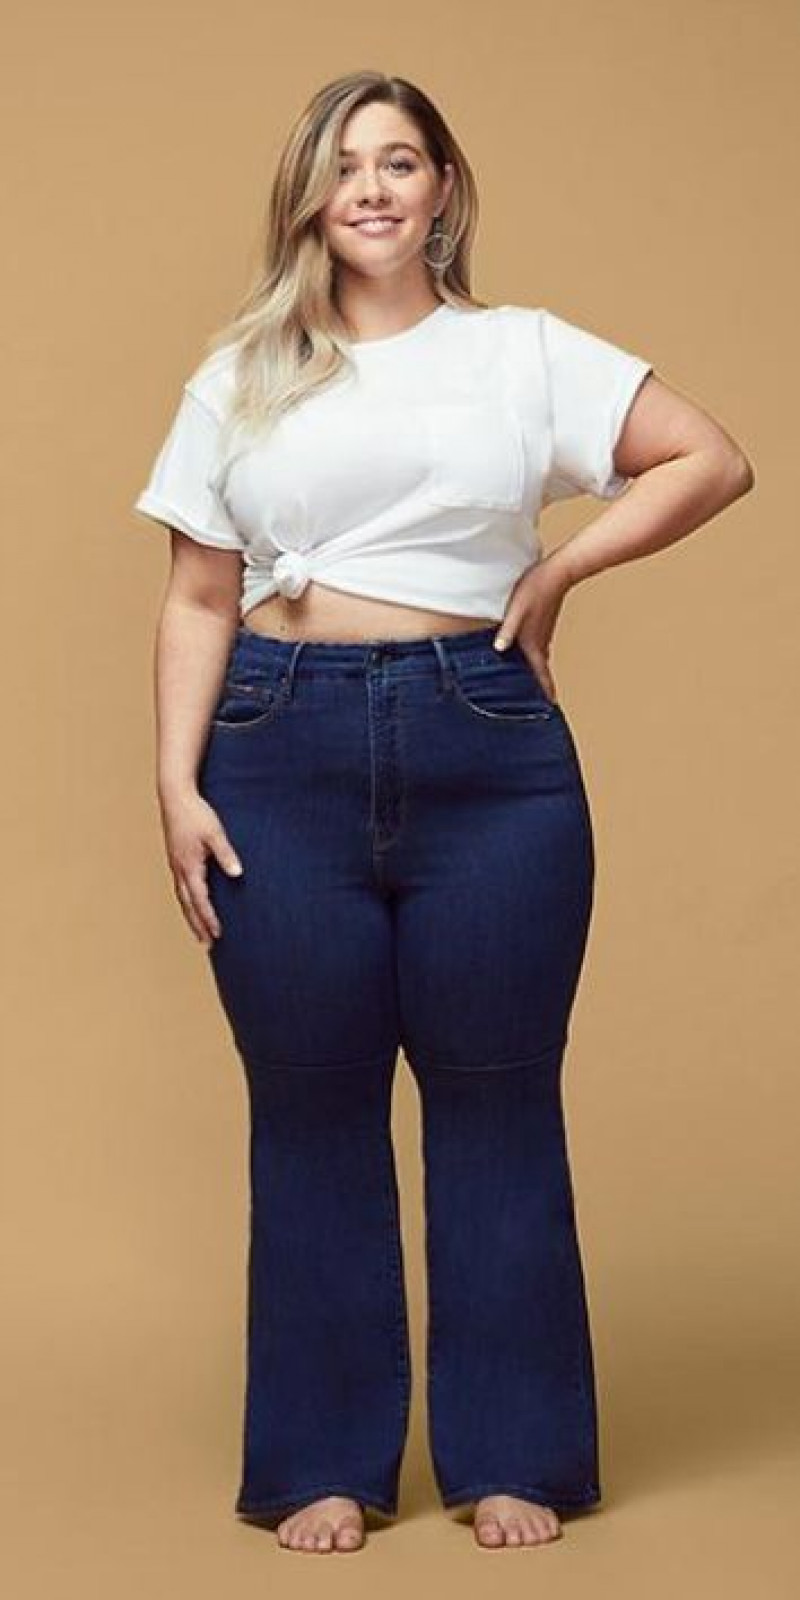 White Short Sleeves Crop Top, Dark Blue And Navy Denim Casual Trouser, Jeans Outfit